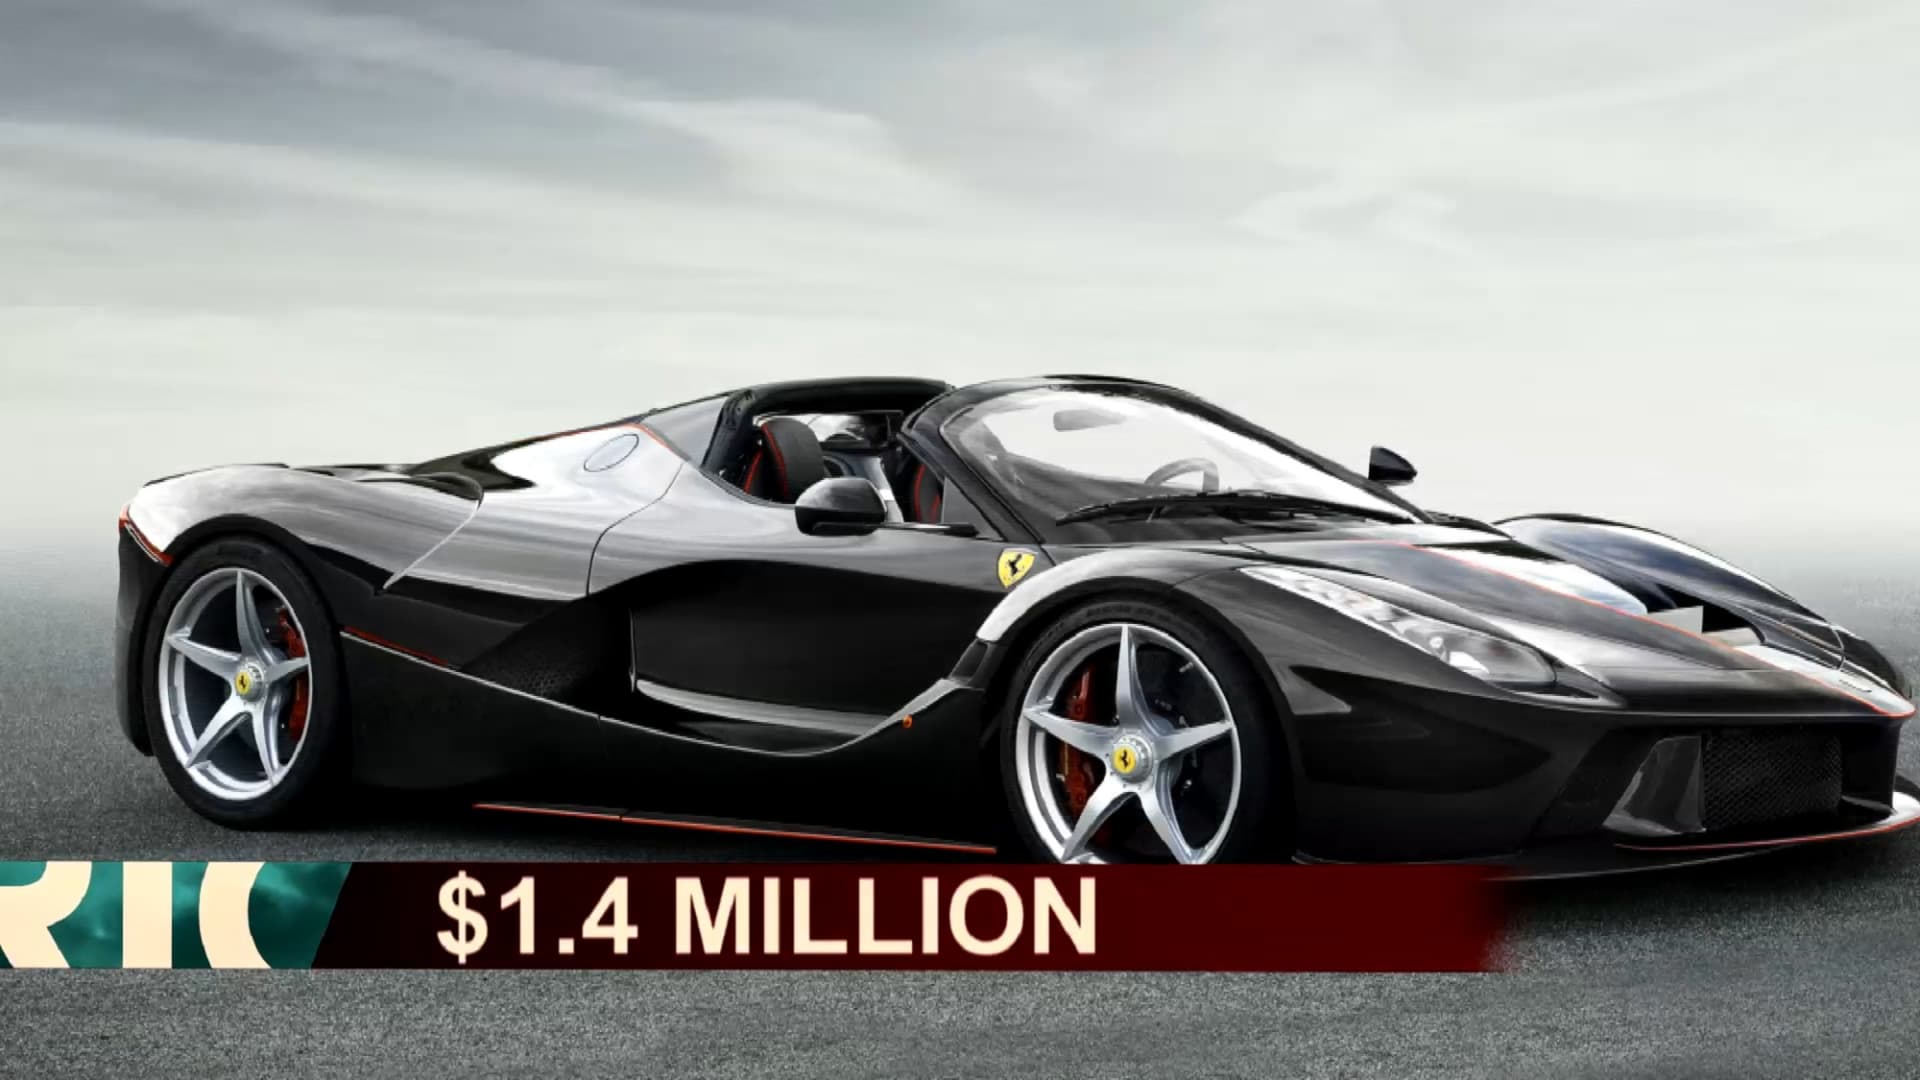 The $1.4 million LaFerrari Spider is an invite-only sports car